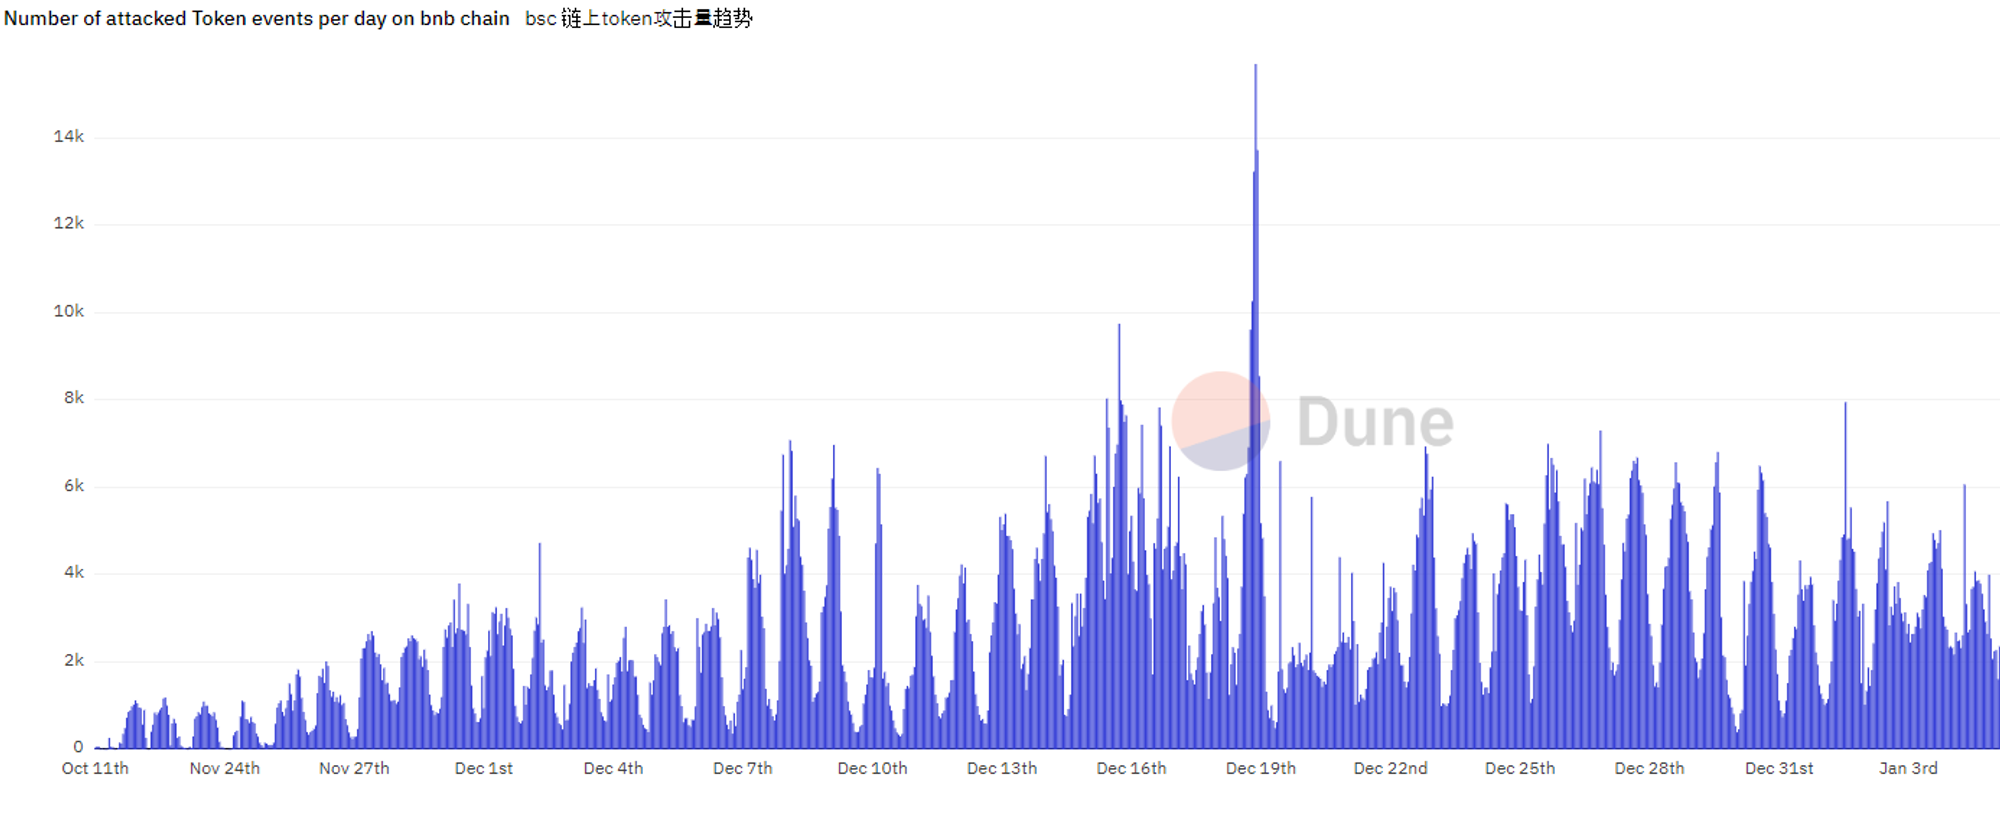 Daily Records of Address Poisoning Attack Occurred in BNB Chain 
[Source=Dune Dashboard https://dune.com/opang/first-and-last-address-construction]